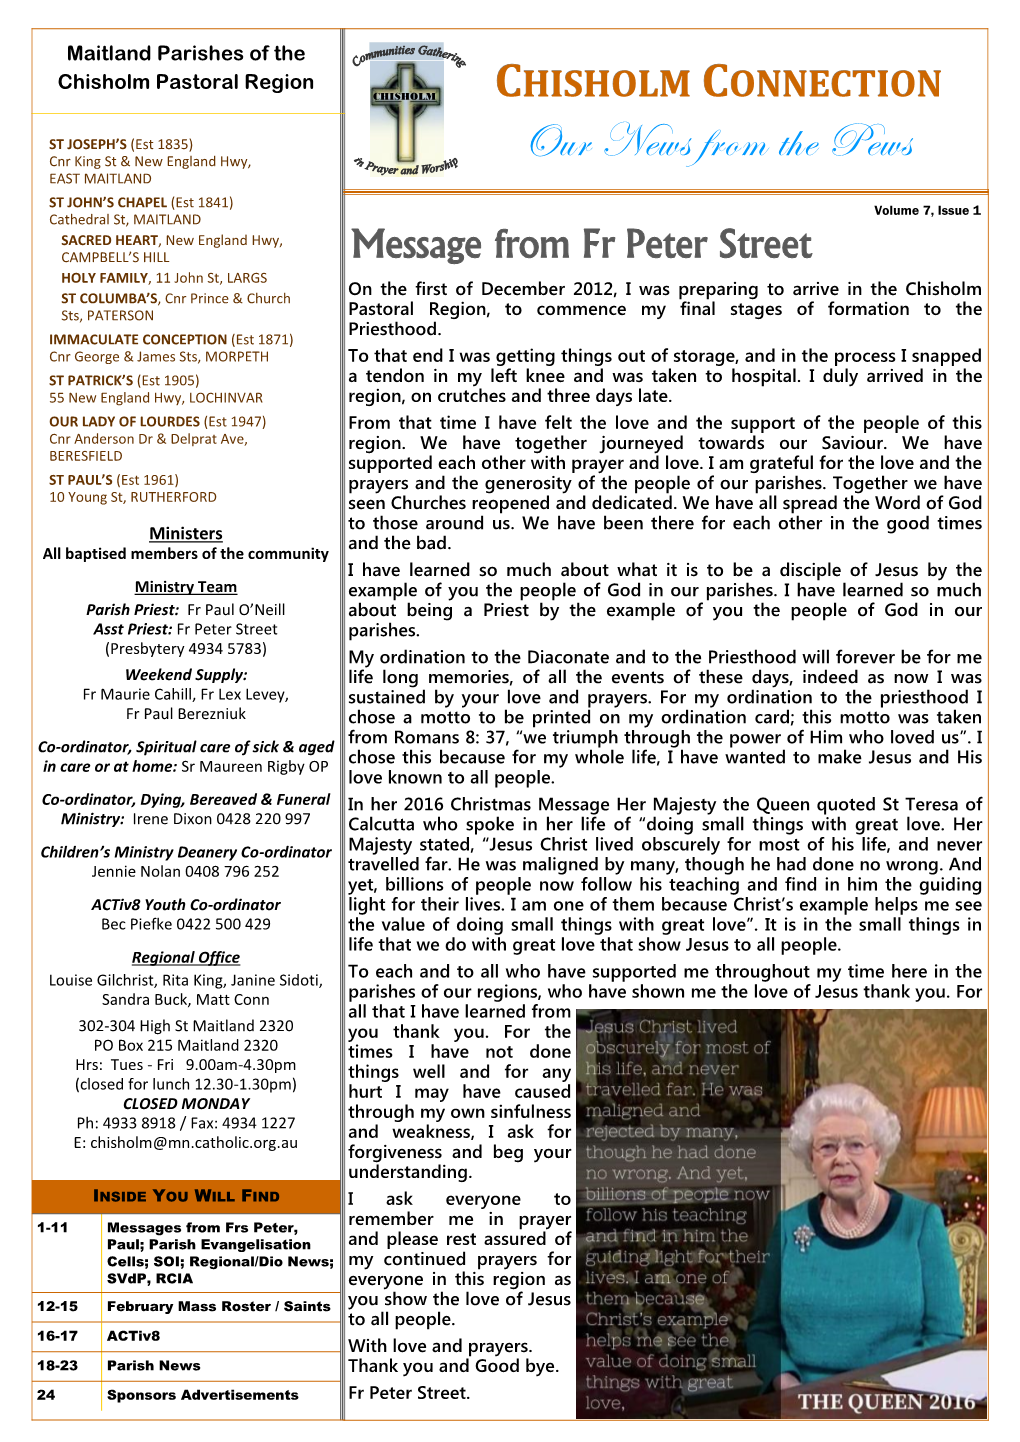 Our News from the Pews EAST MAITLAND